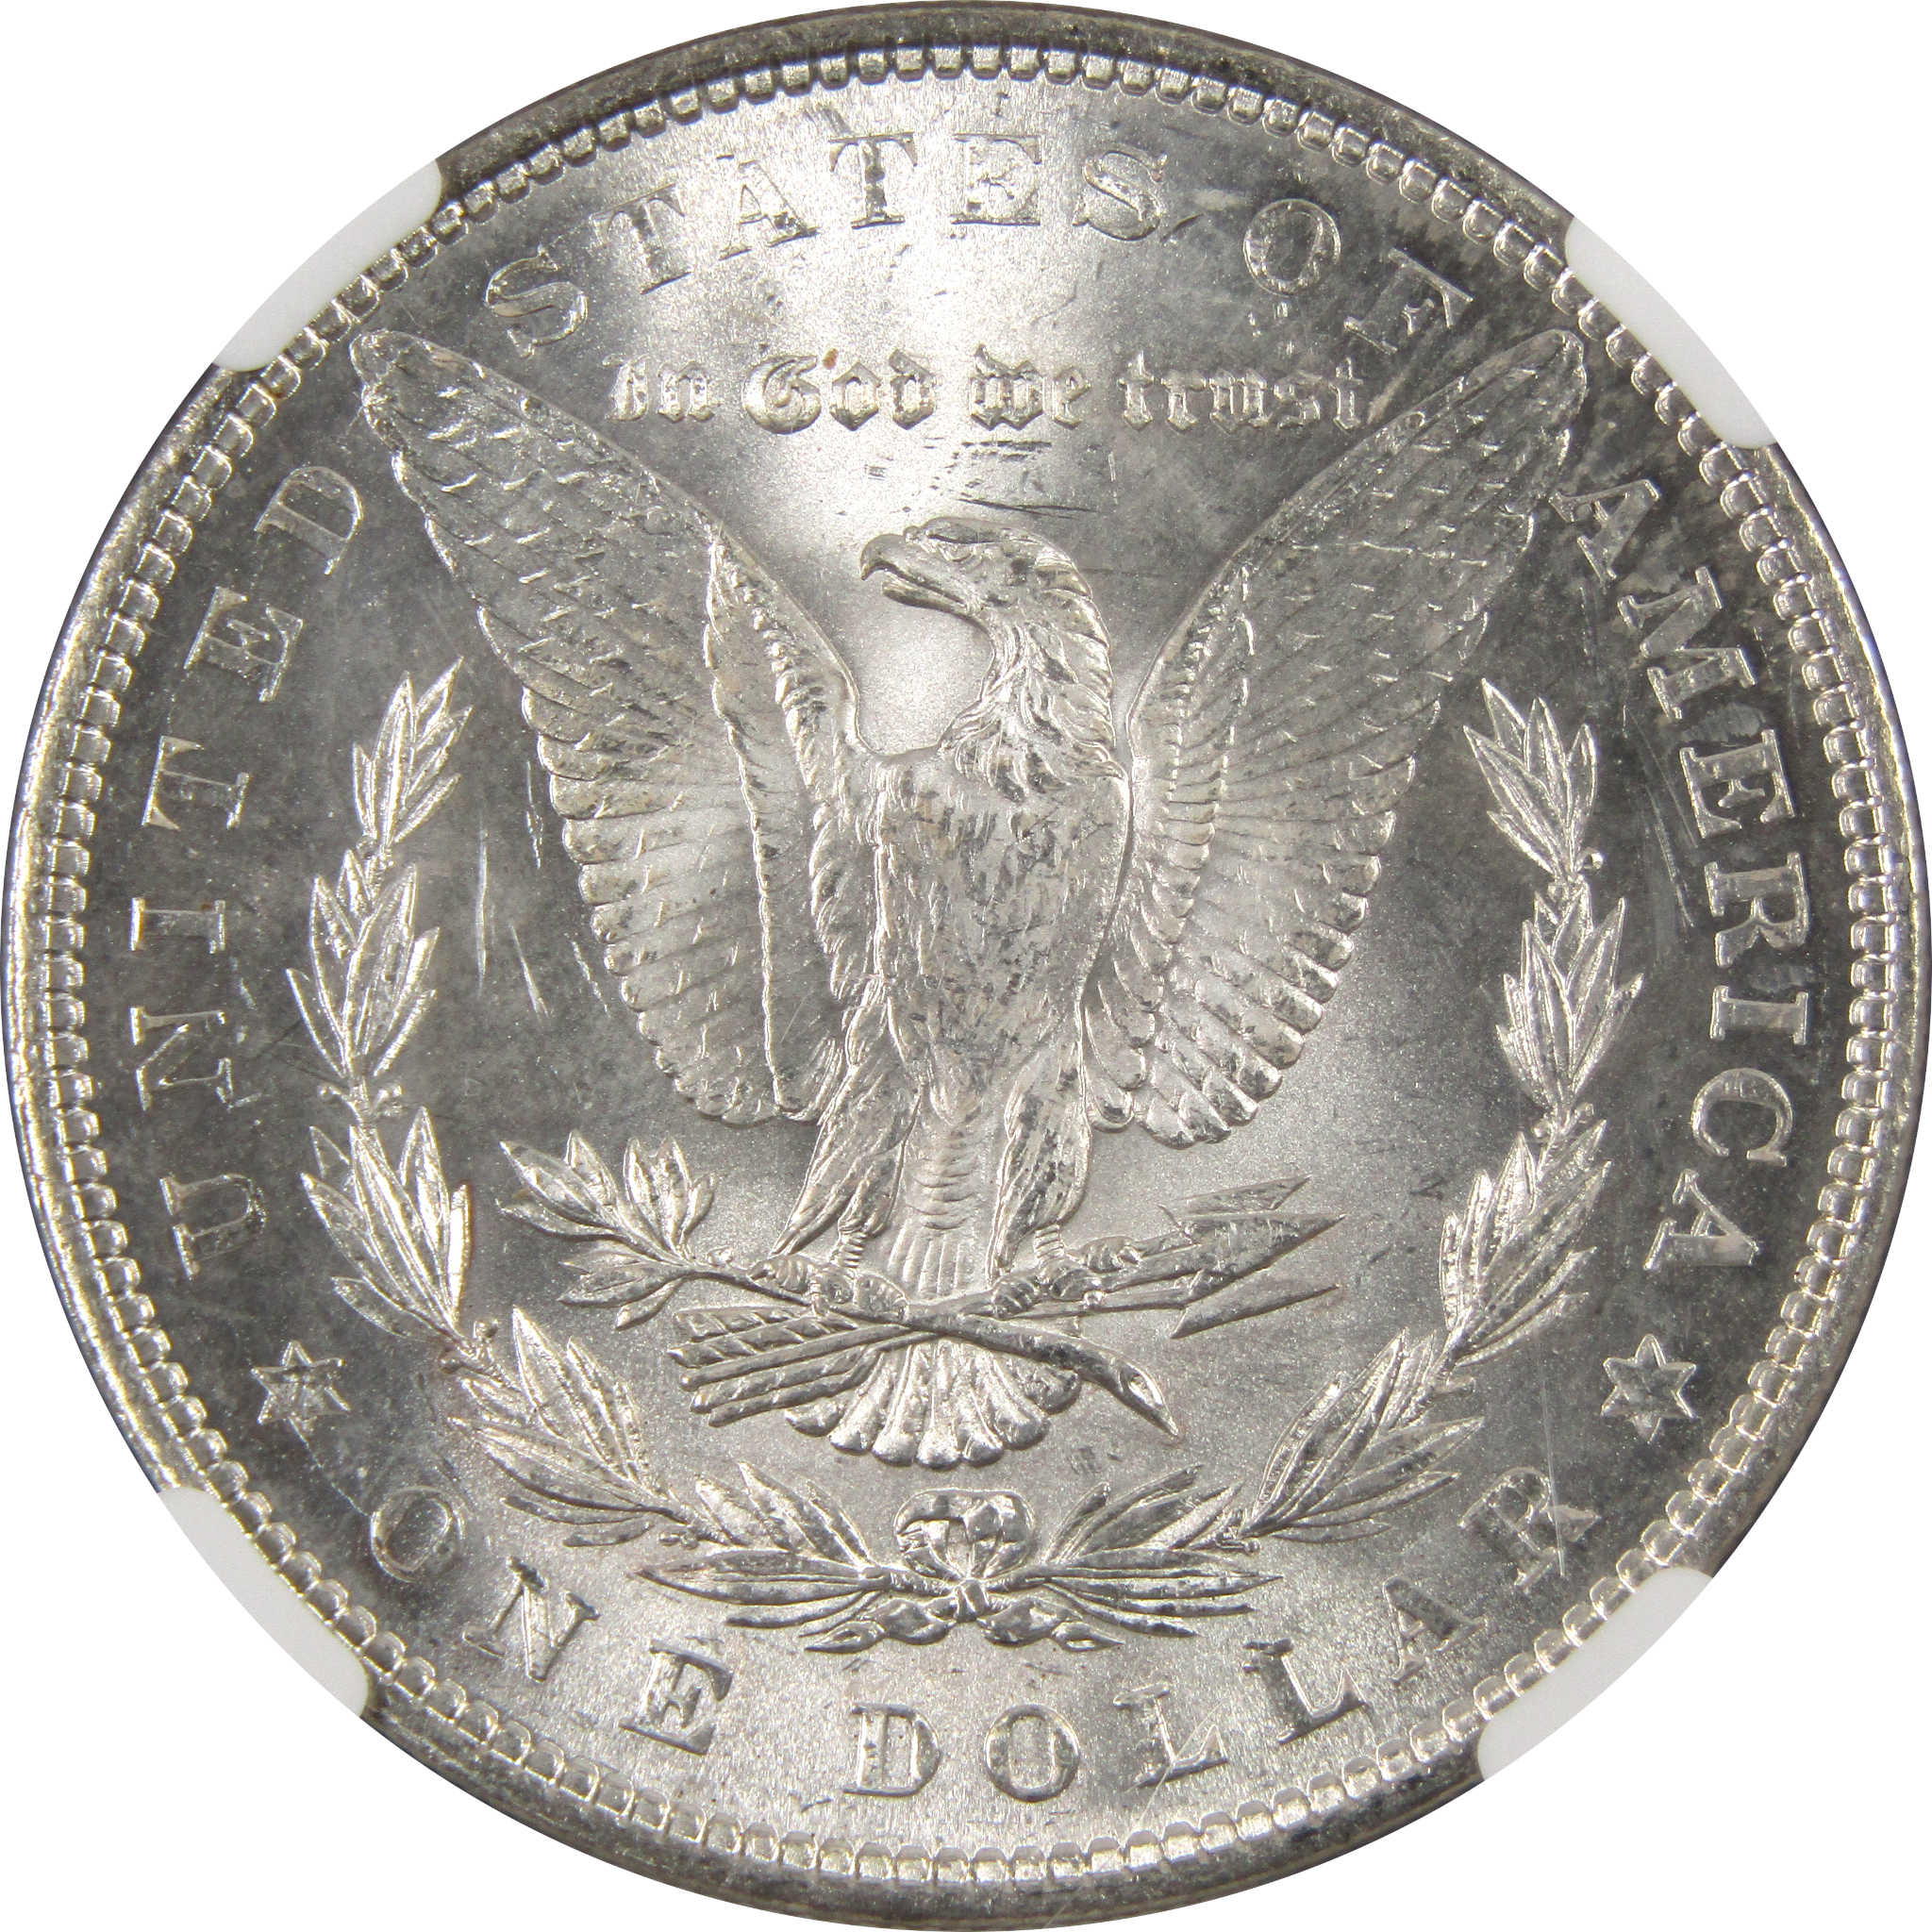 1878 7TF Rev 79 Morgan Dollar MS 62 NGC 90% Silver $1 Unc SKU:I9220 - Morgan coin - Morgan silver dollar - Morgan silver dollar for sale - Profile Coins &amp; Collectibles